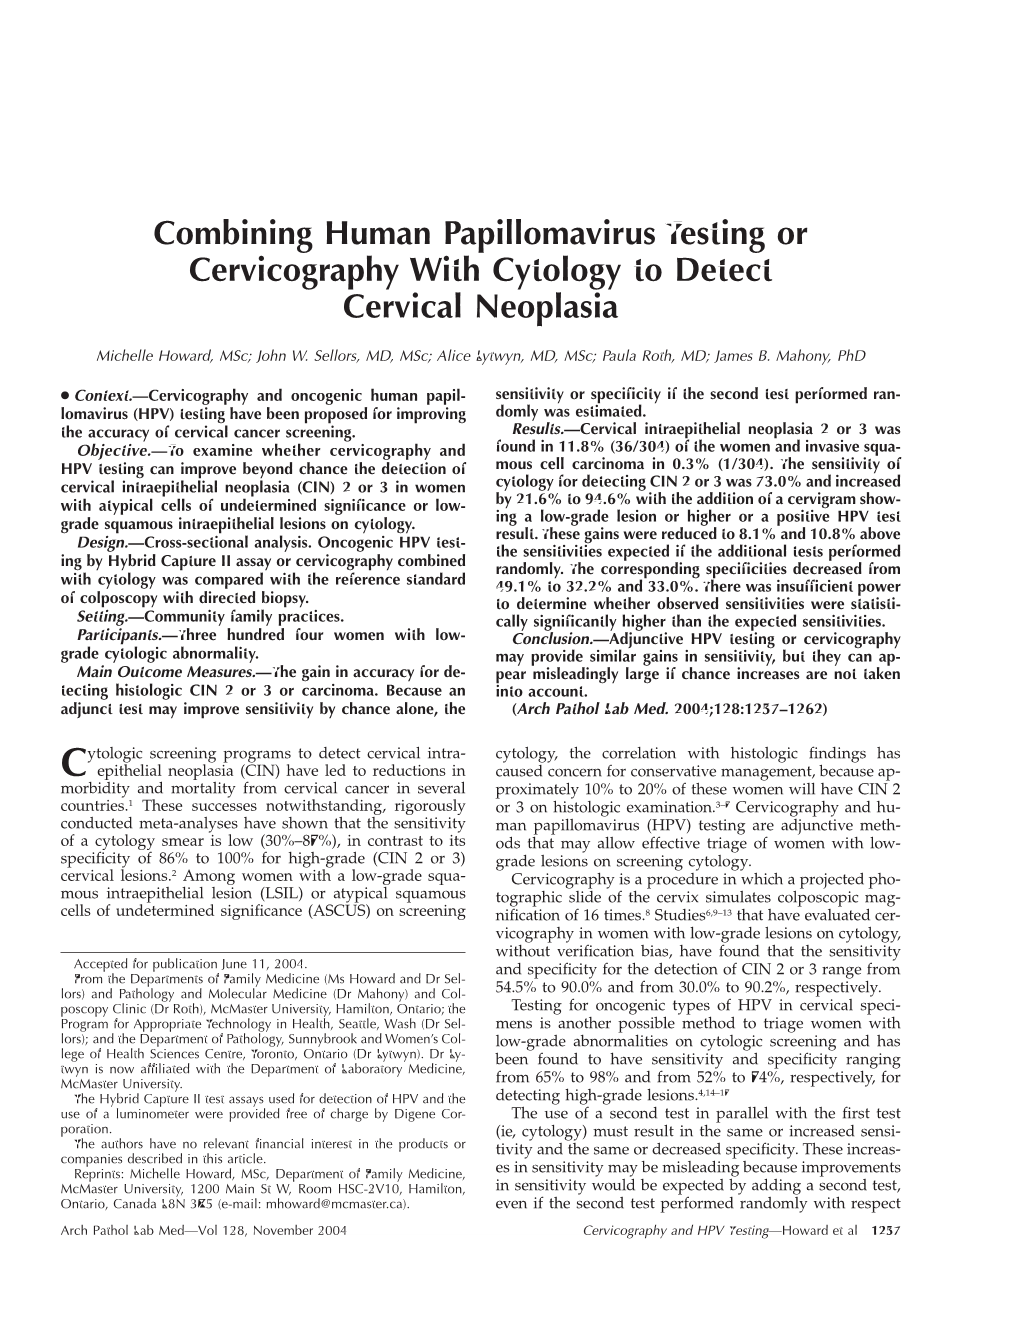 Combining Human Papillomavirus Testing Or Cervicography with Cytology to Detect Cervical Neoplasia